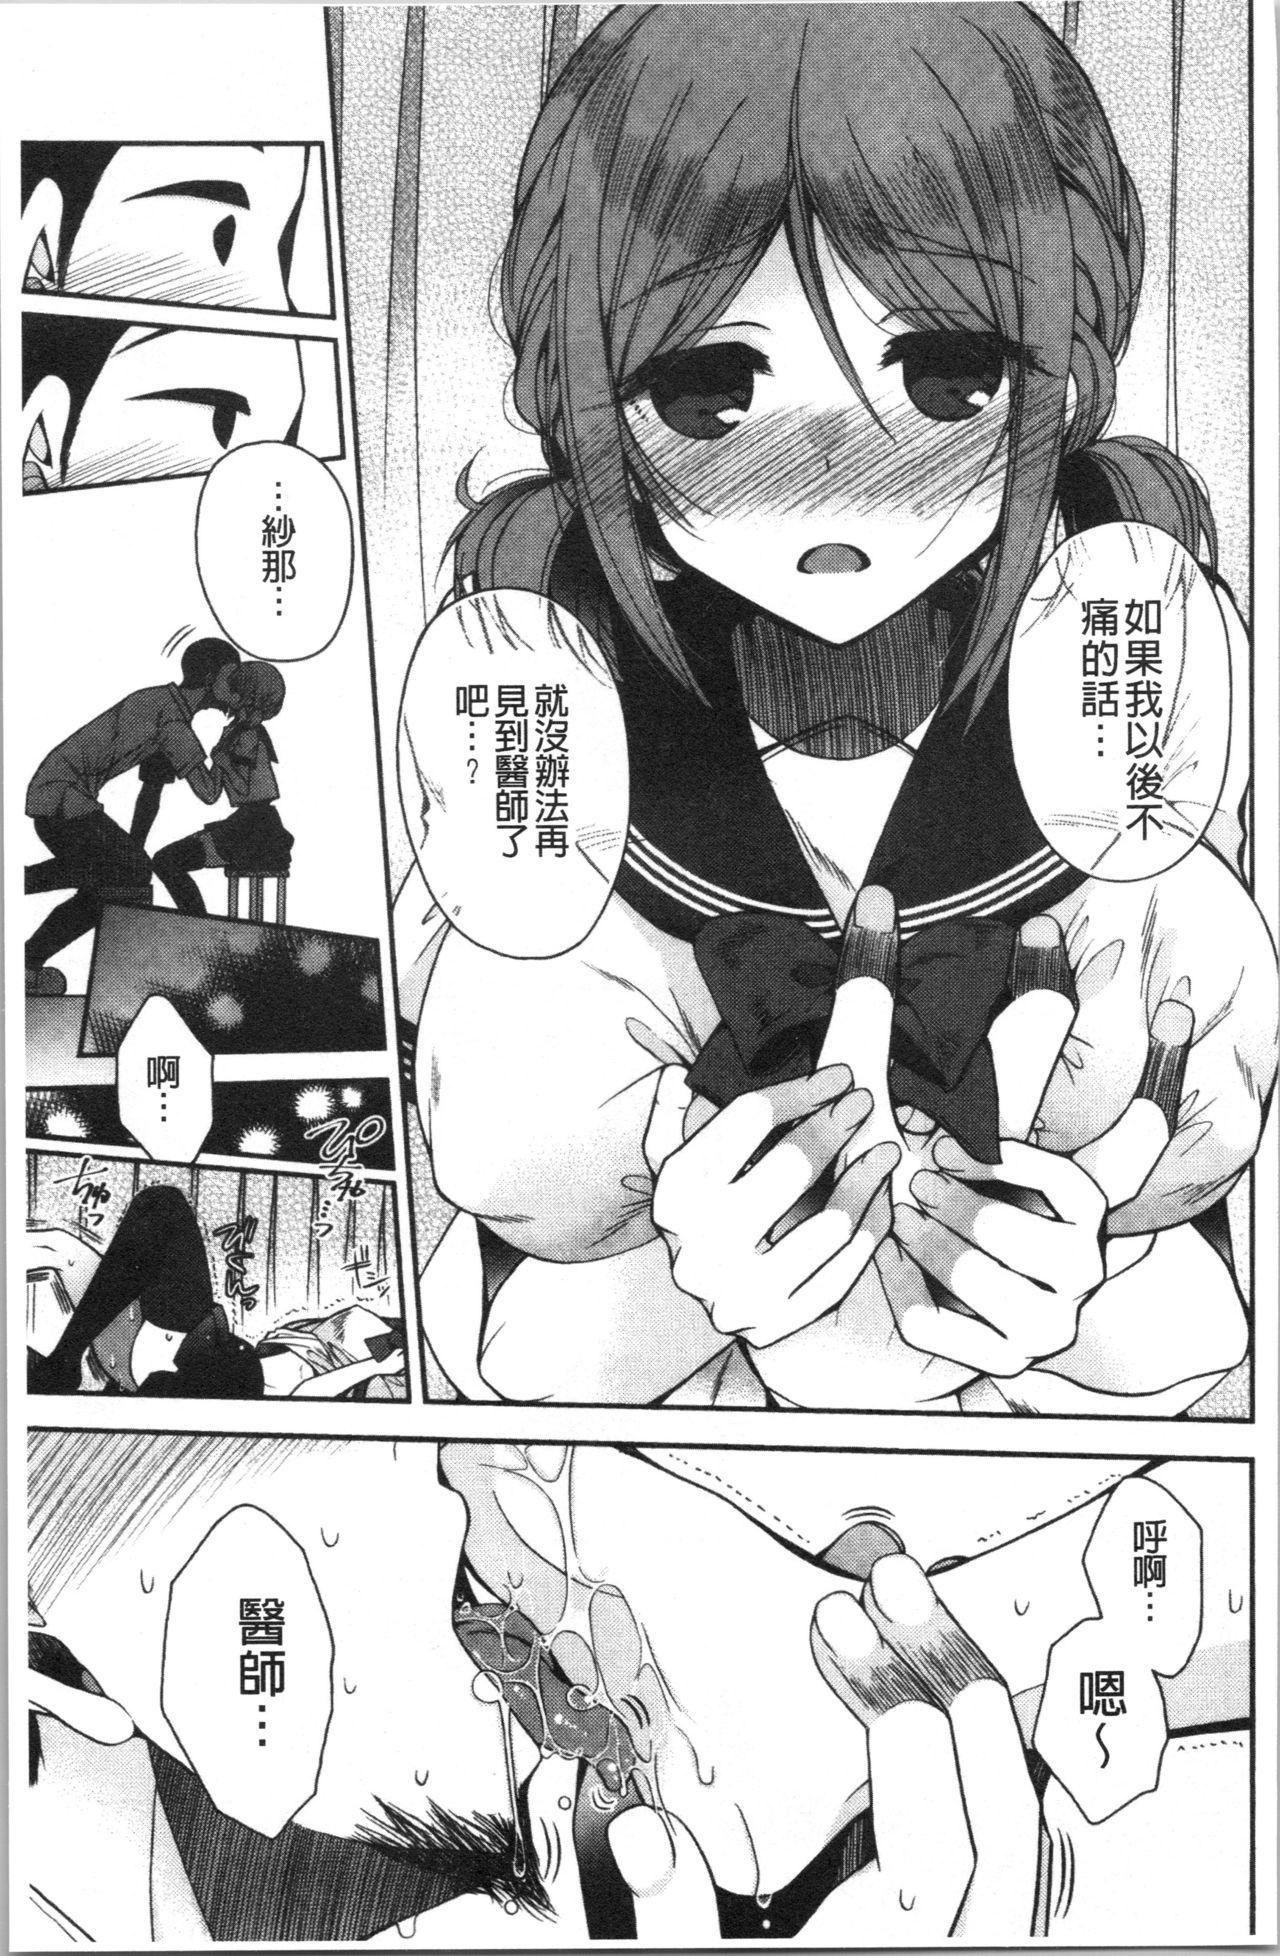 Hatsukoi Melty - Melty First Love 54